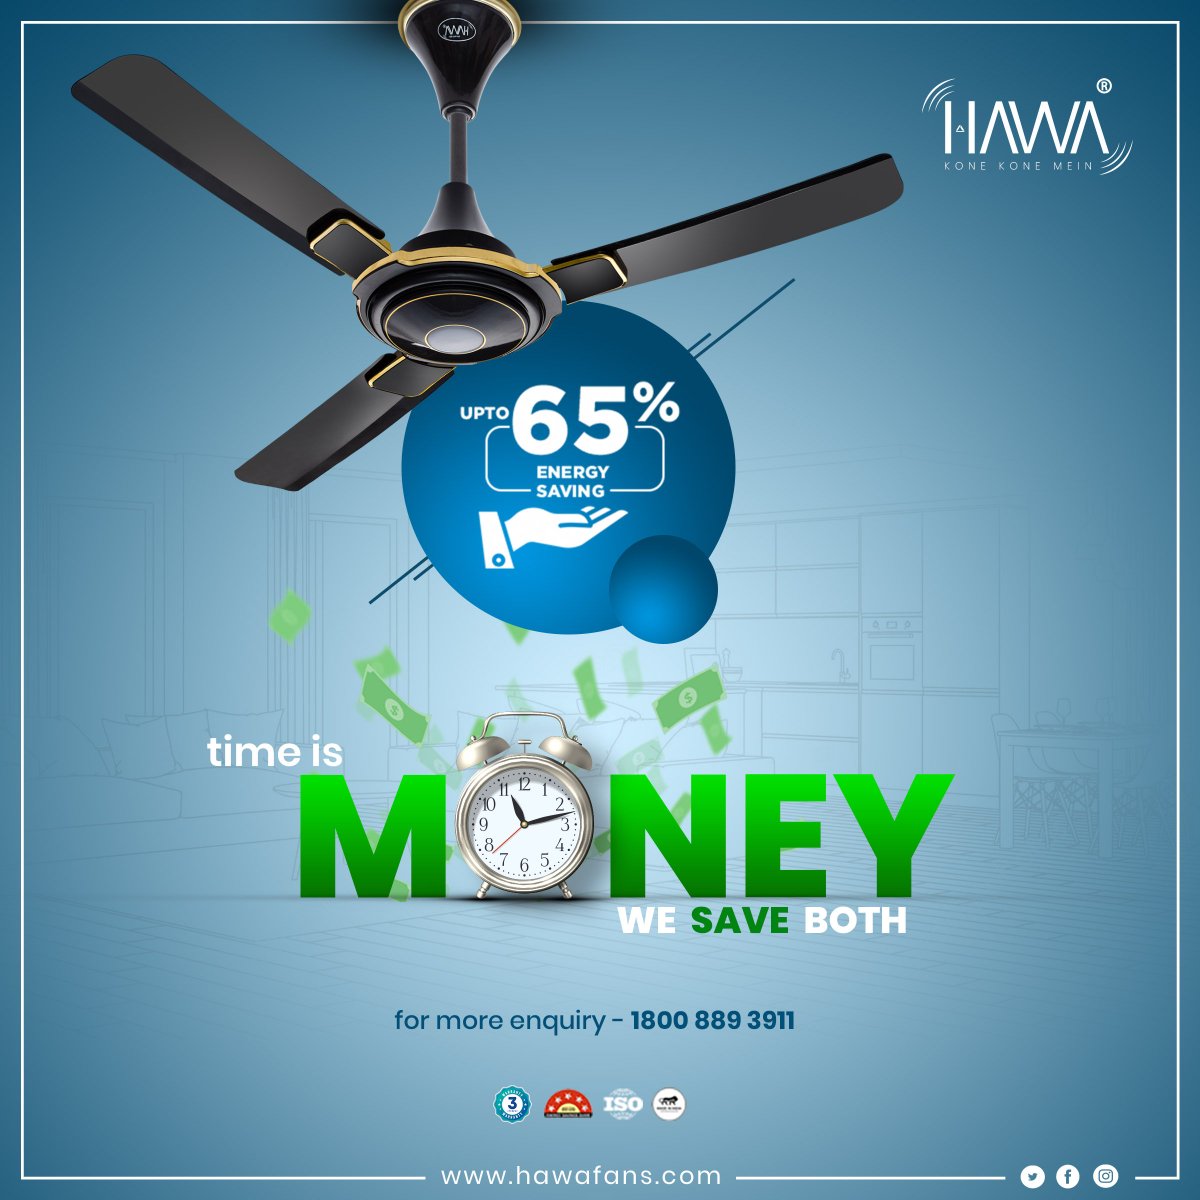 Time is Money & We save both. Hawa fans help you save upto 65% in energy consumption.

.
.
.
#hawafans #energy #smartchoices #bldcfans #smartfans #smartremote #ceilingfan #bldcfans #powersaving #bldcmotor #fan  #energyconsumption